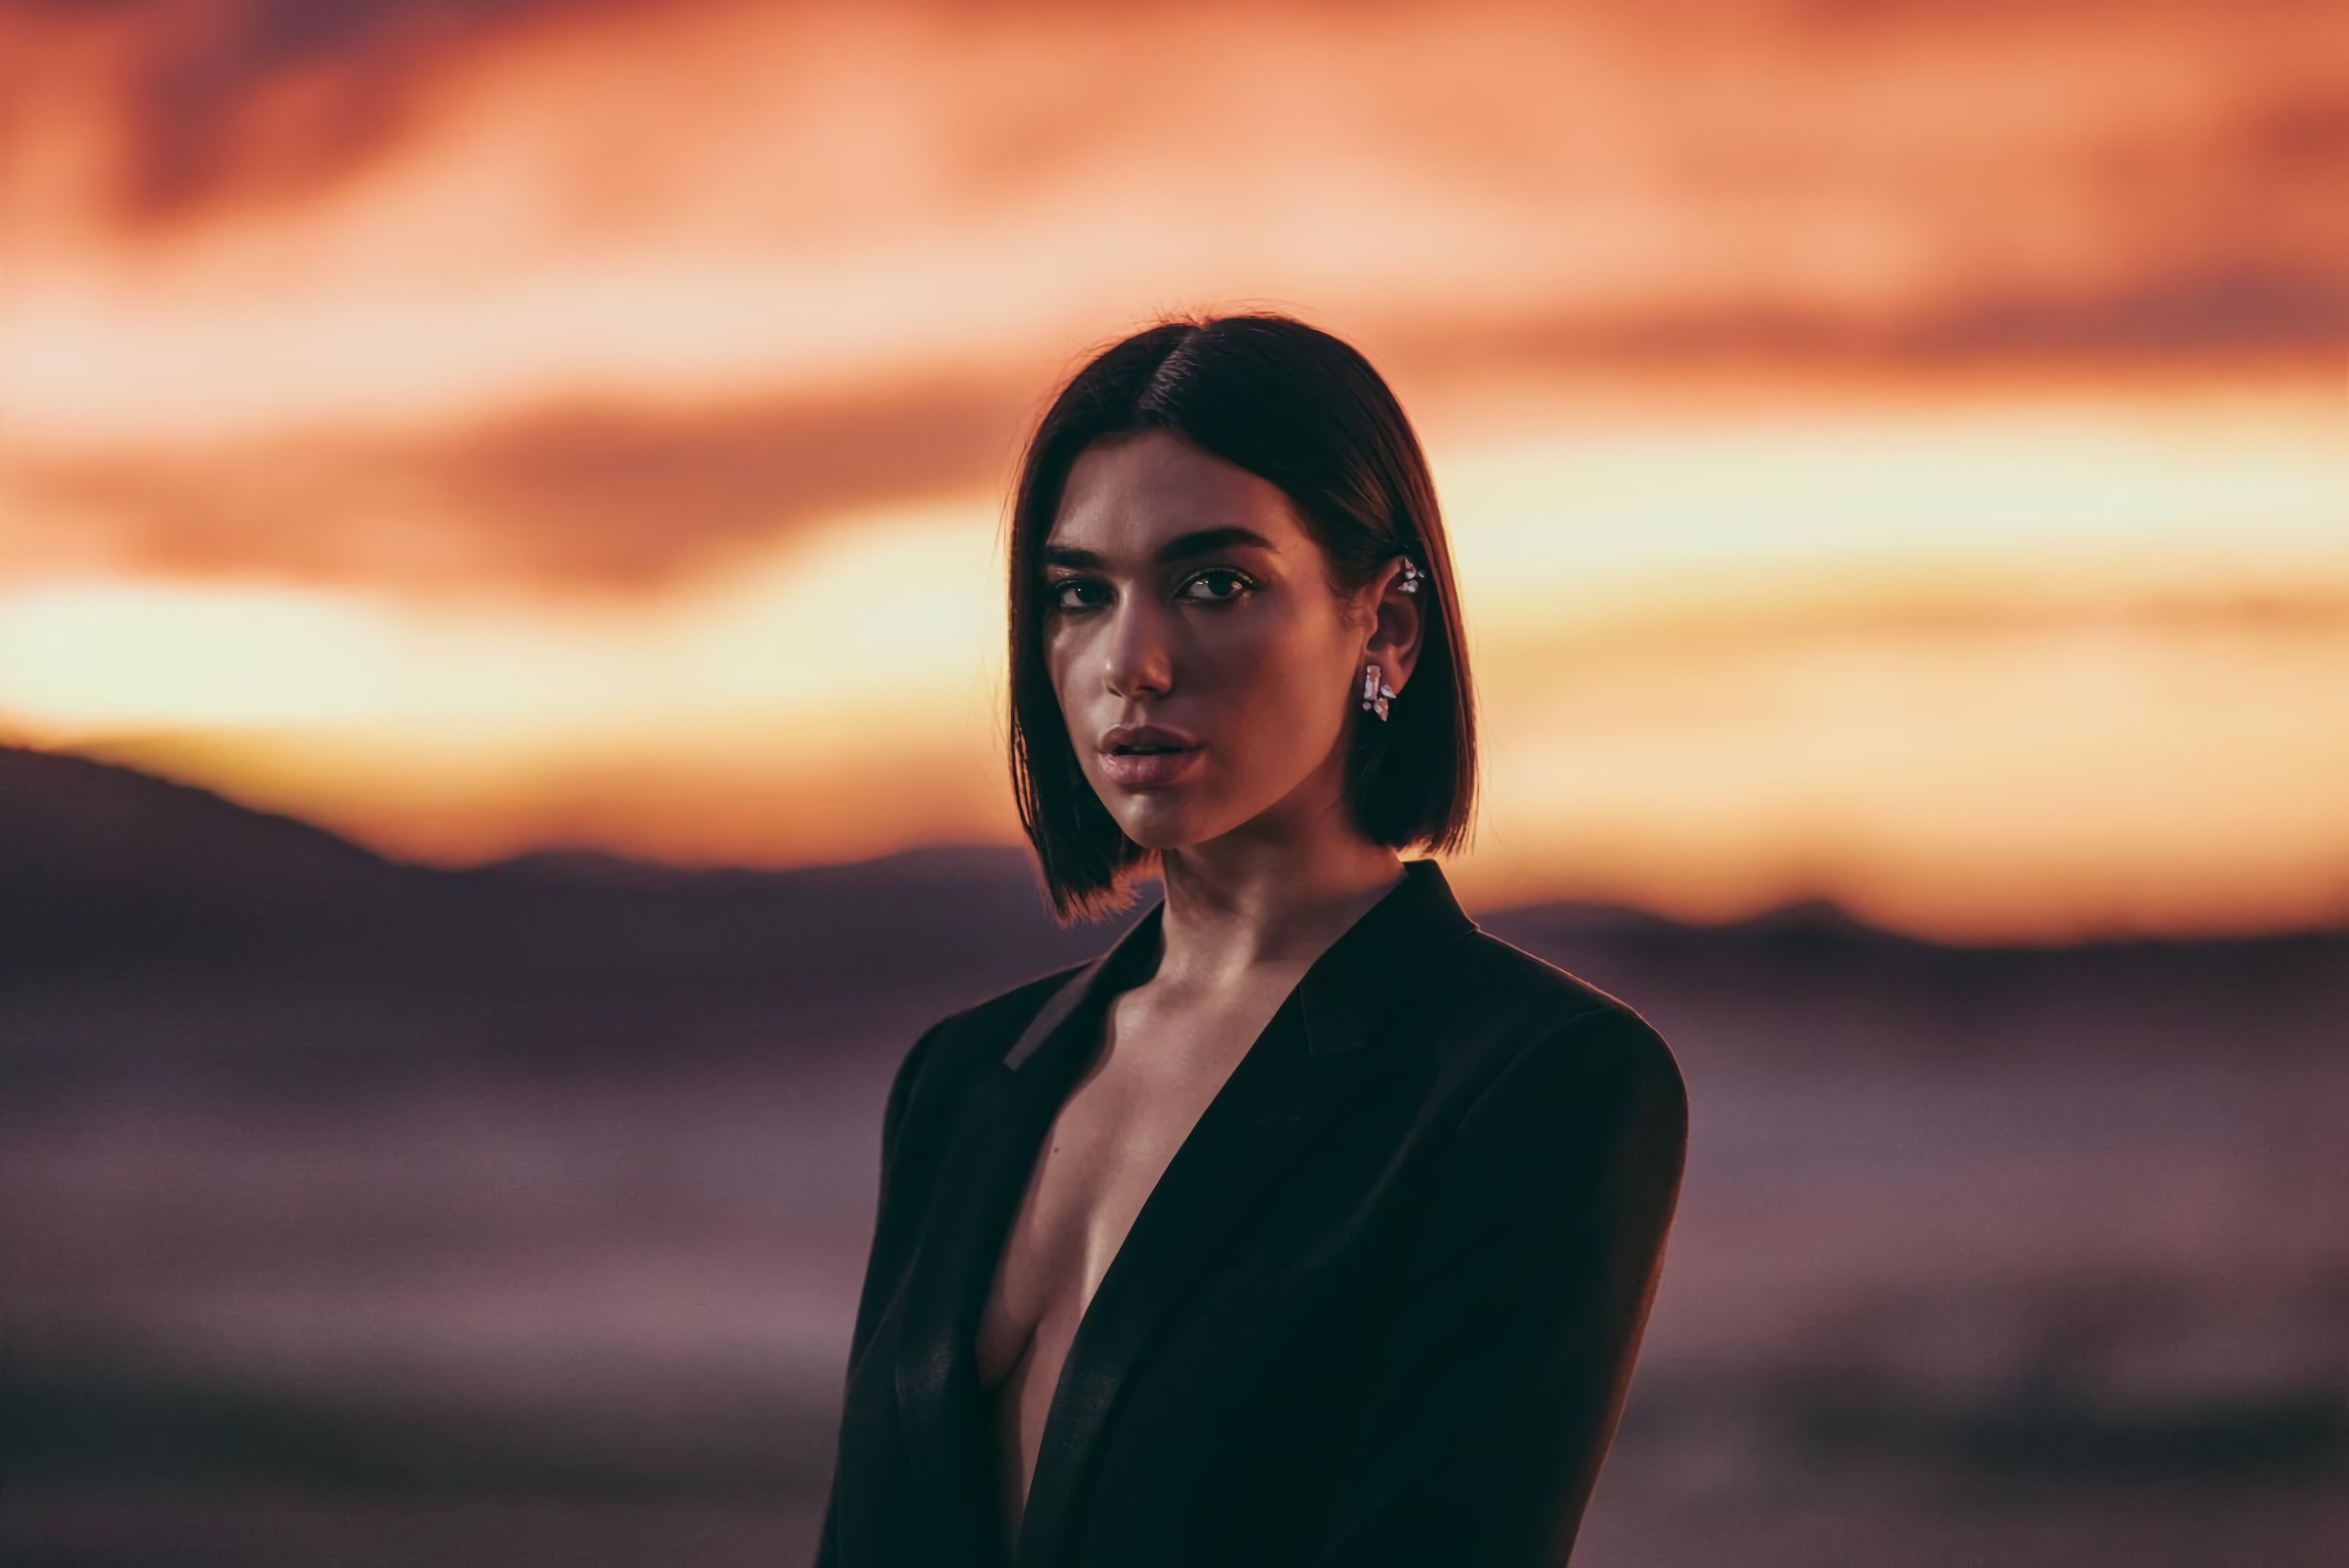 Dua lipa new hd music k wallpapers images backgrounds photos and pictures